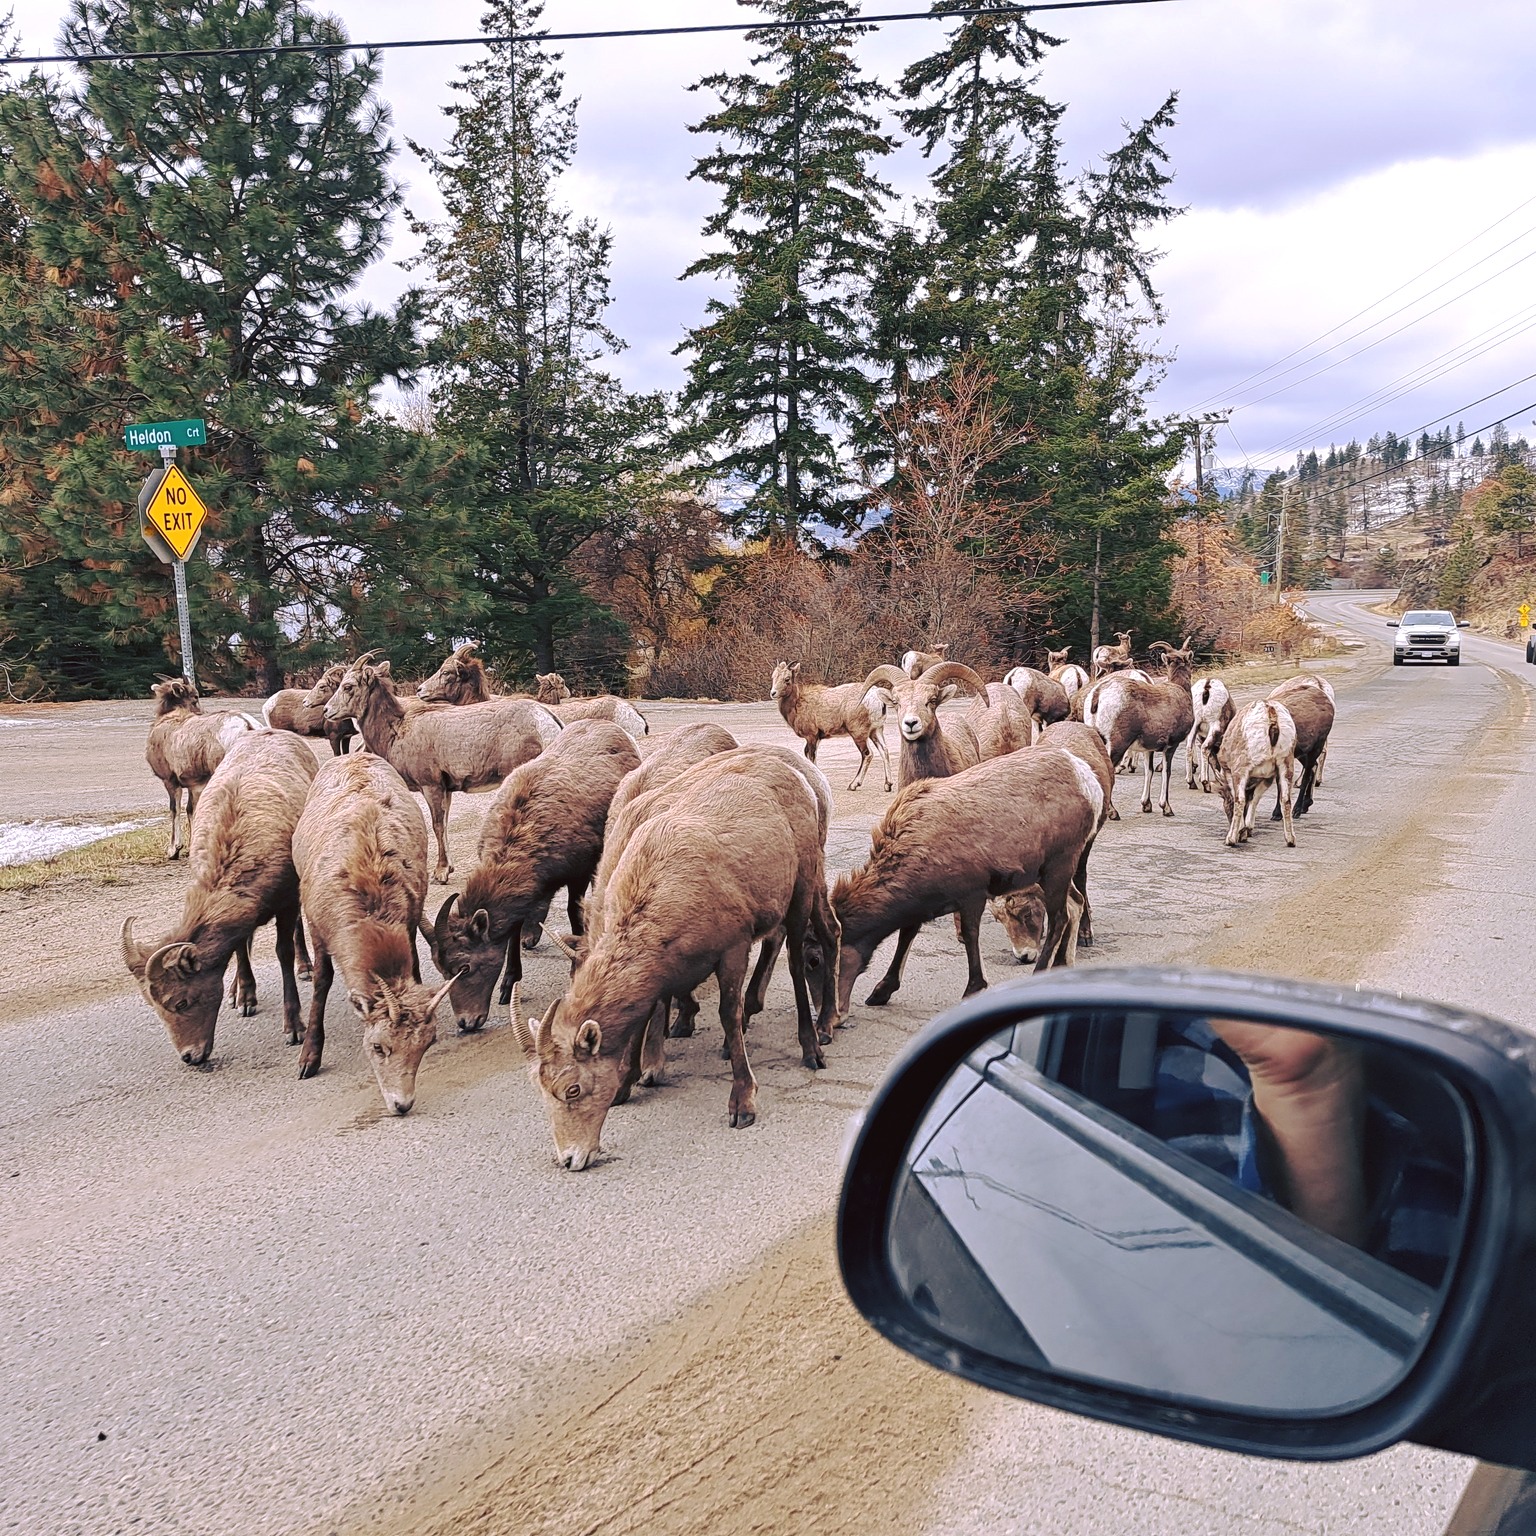 Sheep or Goats? Can you tell the difference? On our way to do outreach in our city ... saw this family of mountain sheep. "My sheep listen to My voice, and I know them, and they follow Me;" John 10:27 
. 
.